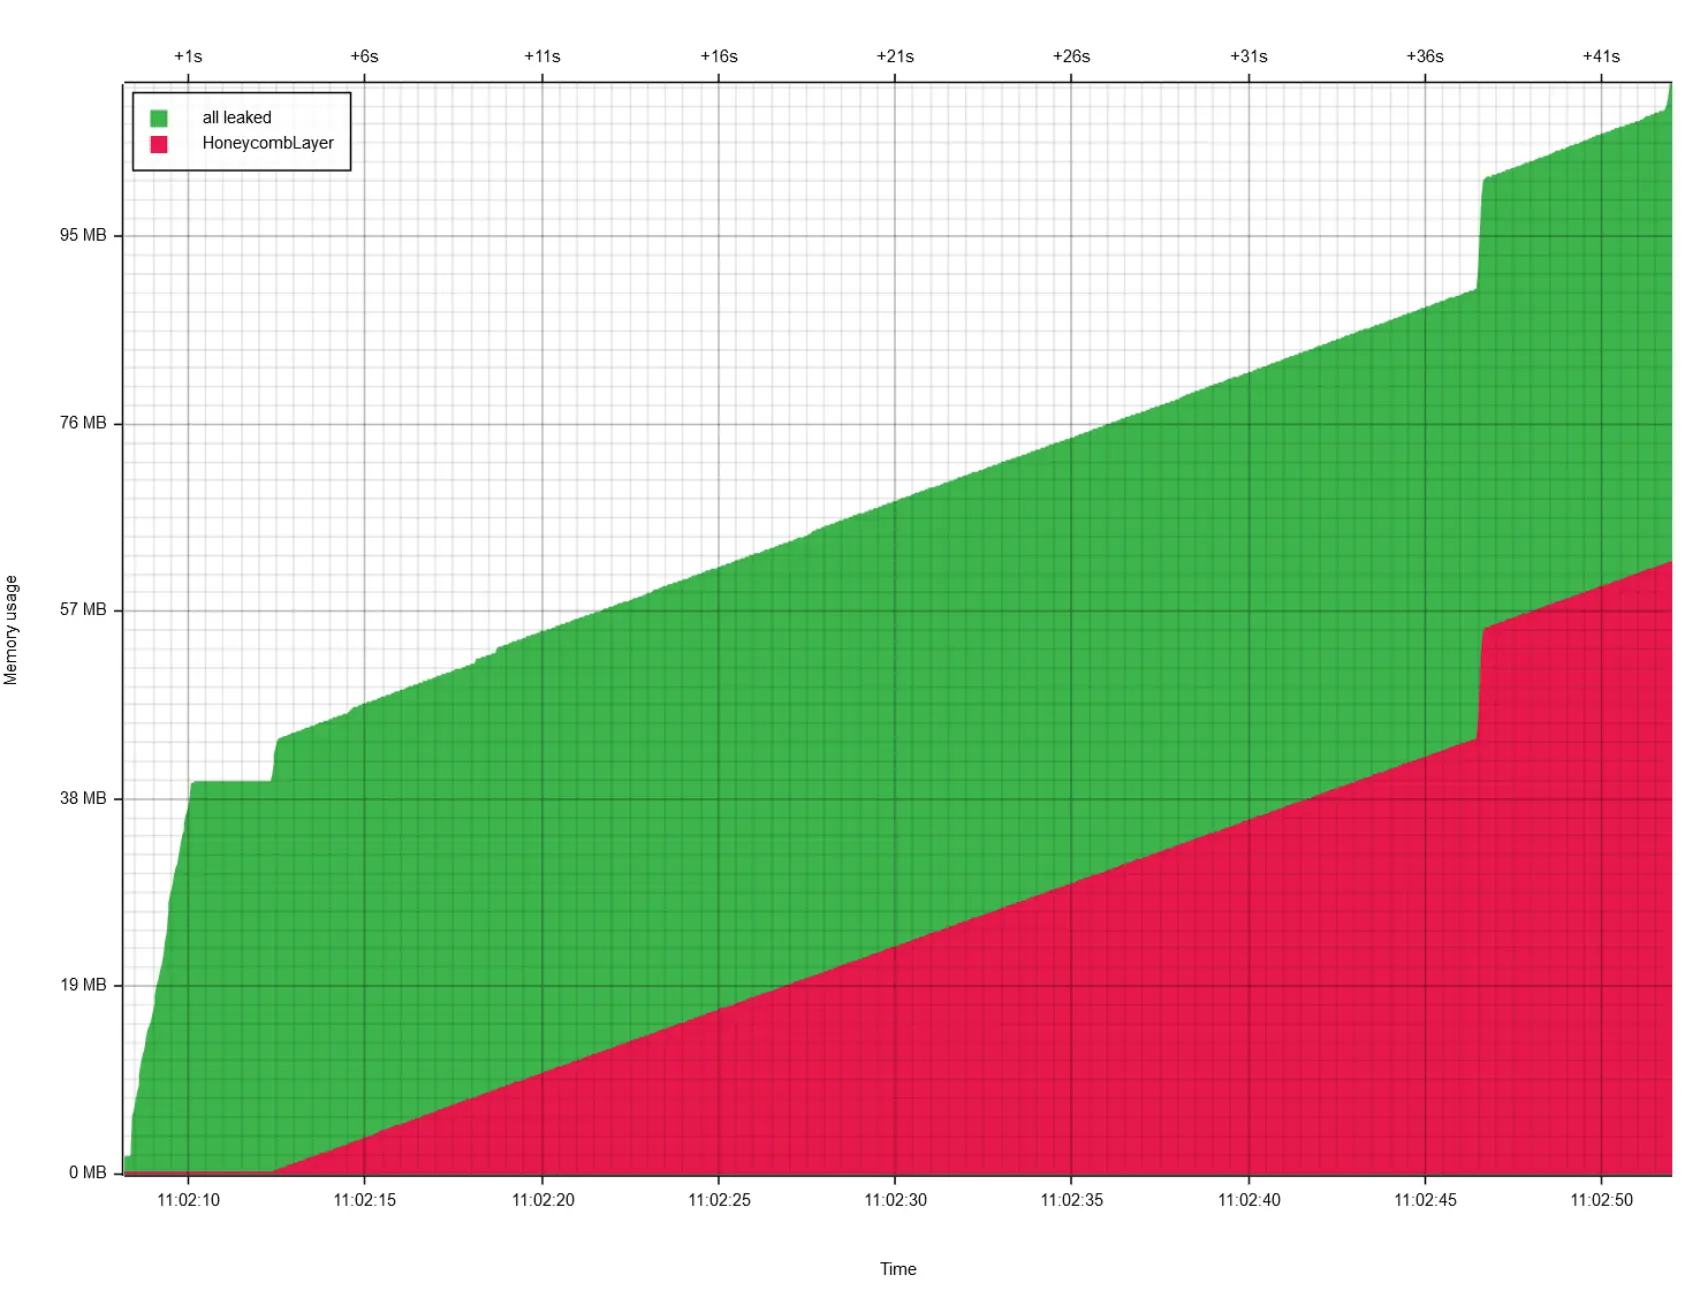 A custom graph with two series: In green, "all memory leaked", and in red, "HoneycombLayer". At first, "all leaked" climbs to 40MB, then stays stable for a bit. Then the load test commences, and both "HoneycombLayer" and "all leaked" climb together, showing that the problem comes, in fact, from HoneycombLayer.